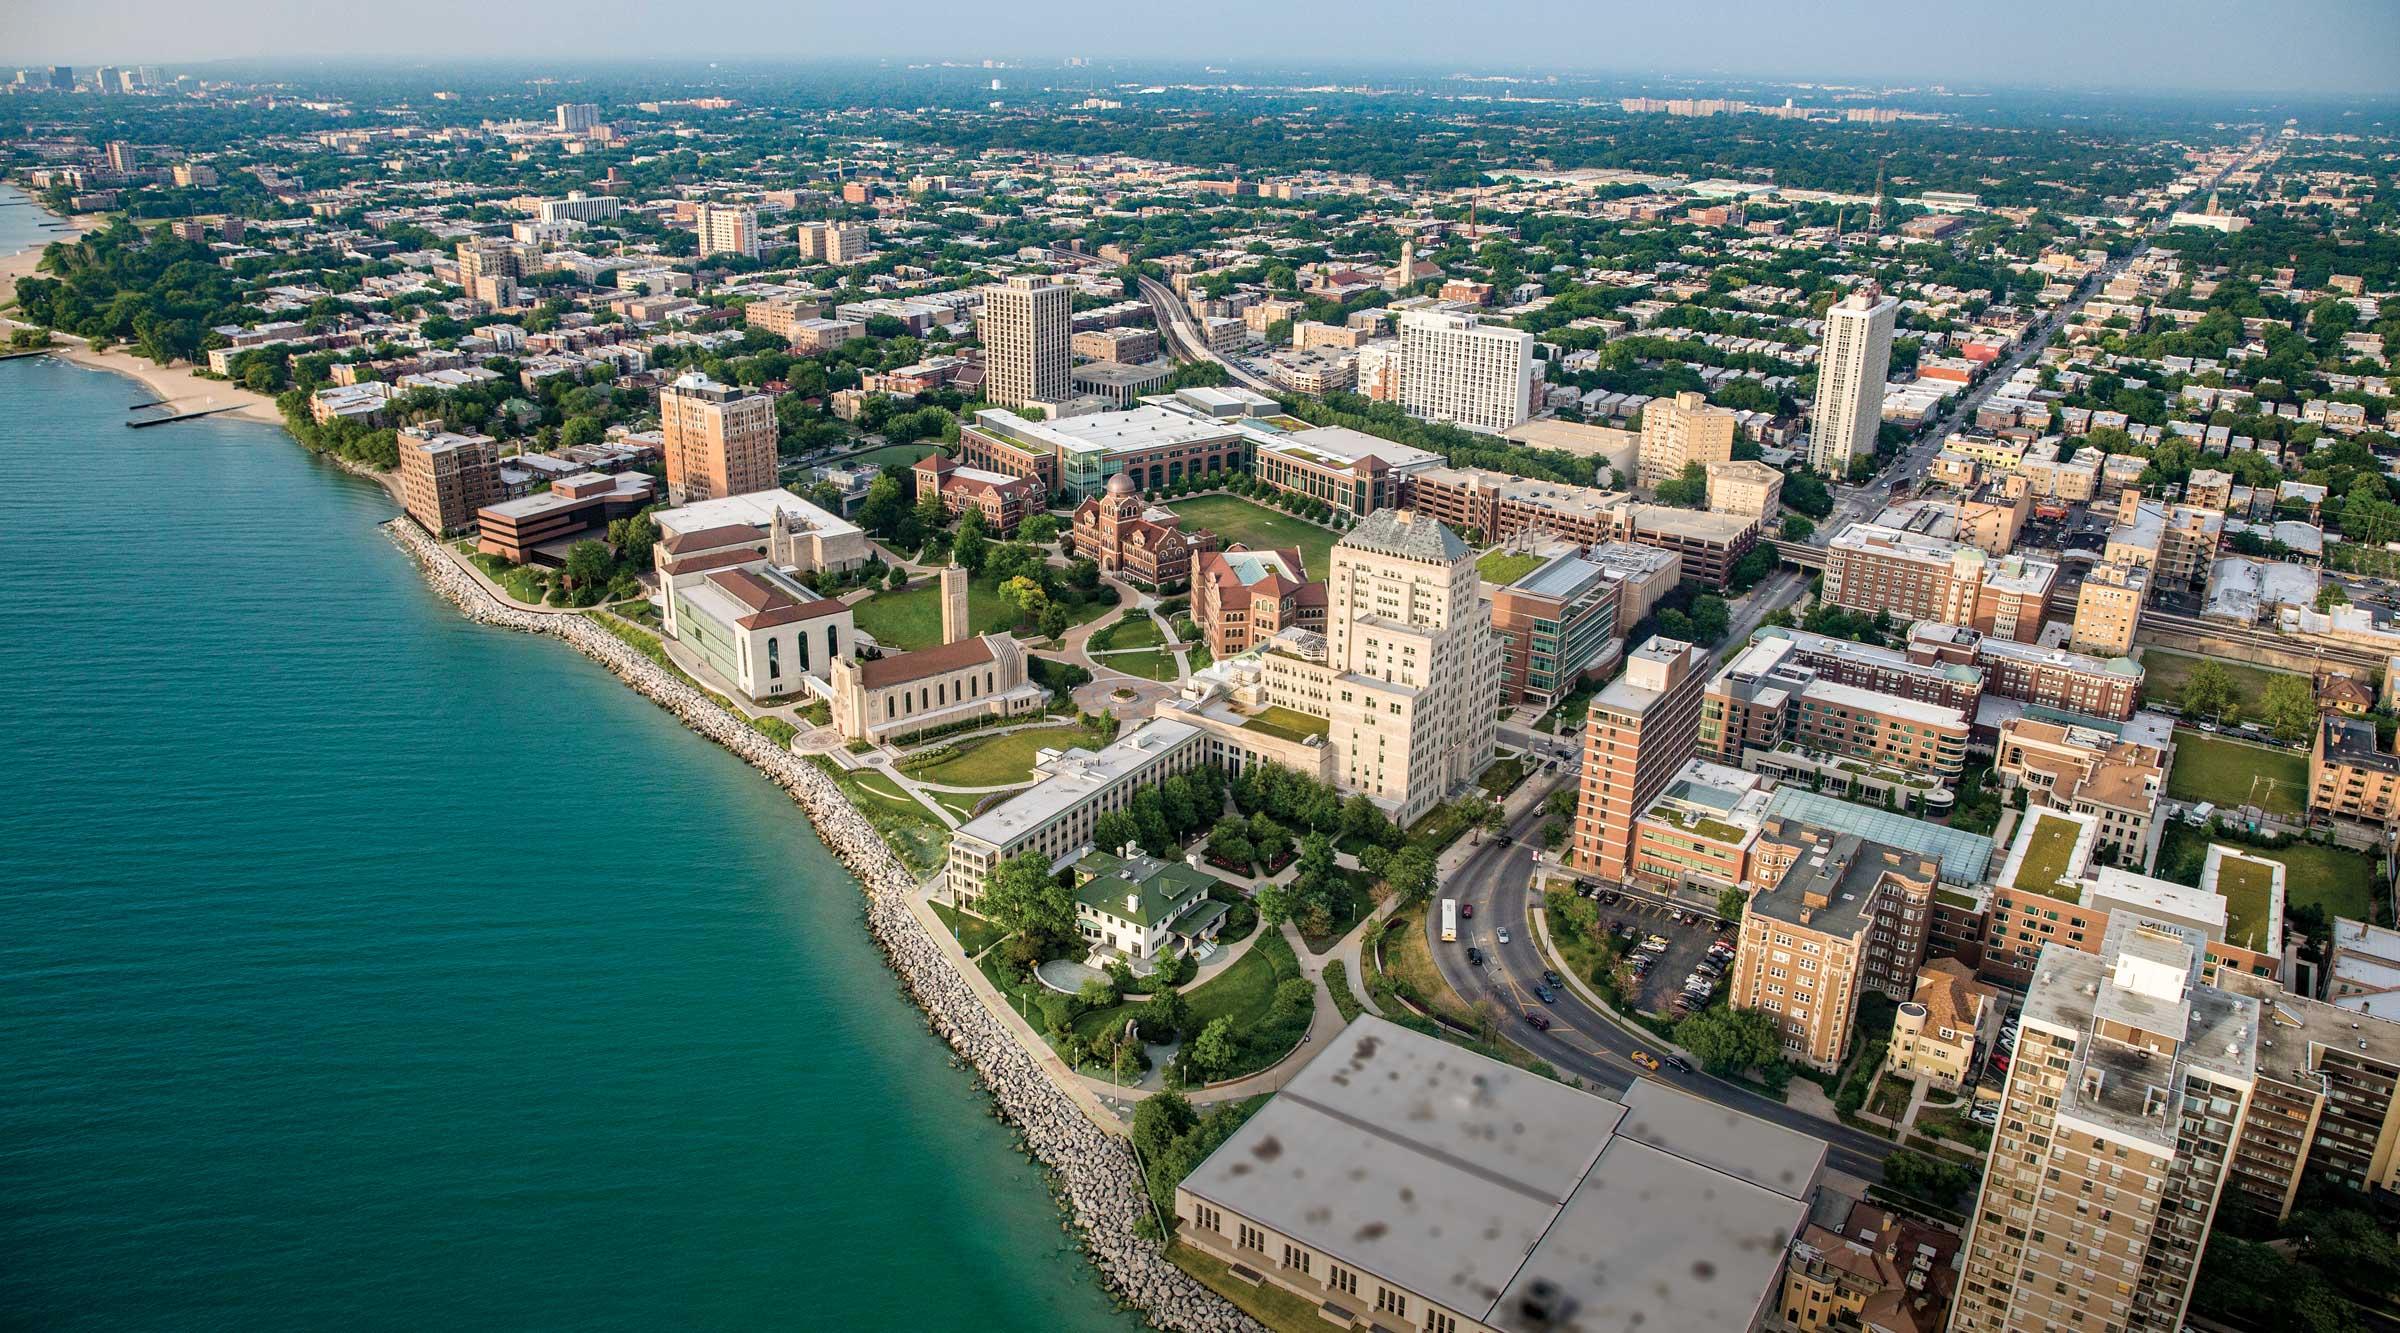 An aerial perspective of Loyola University Chicago's Lake Shore Campus from a southeast vantage point